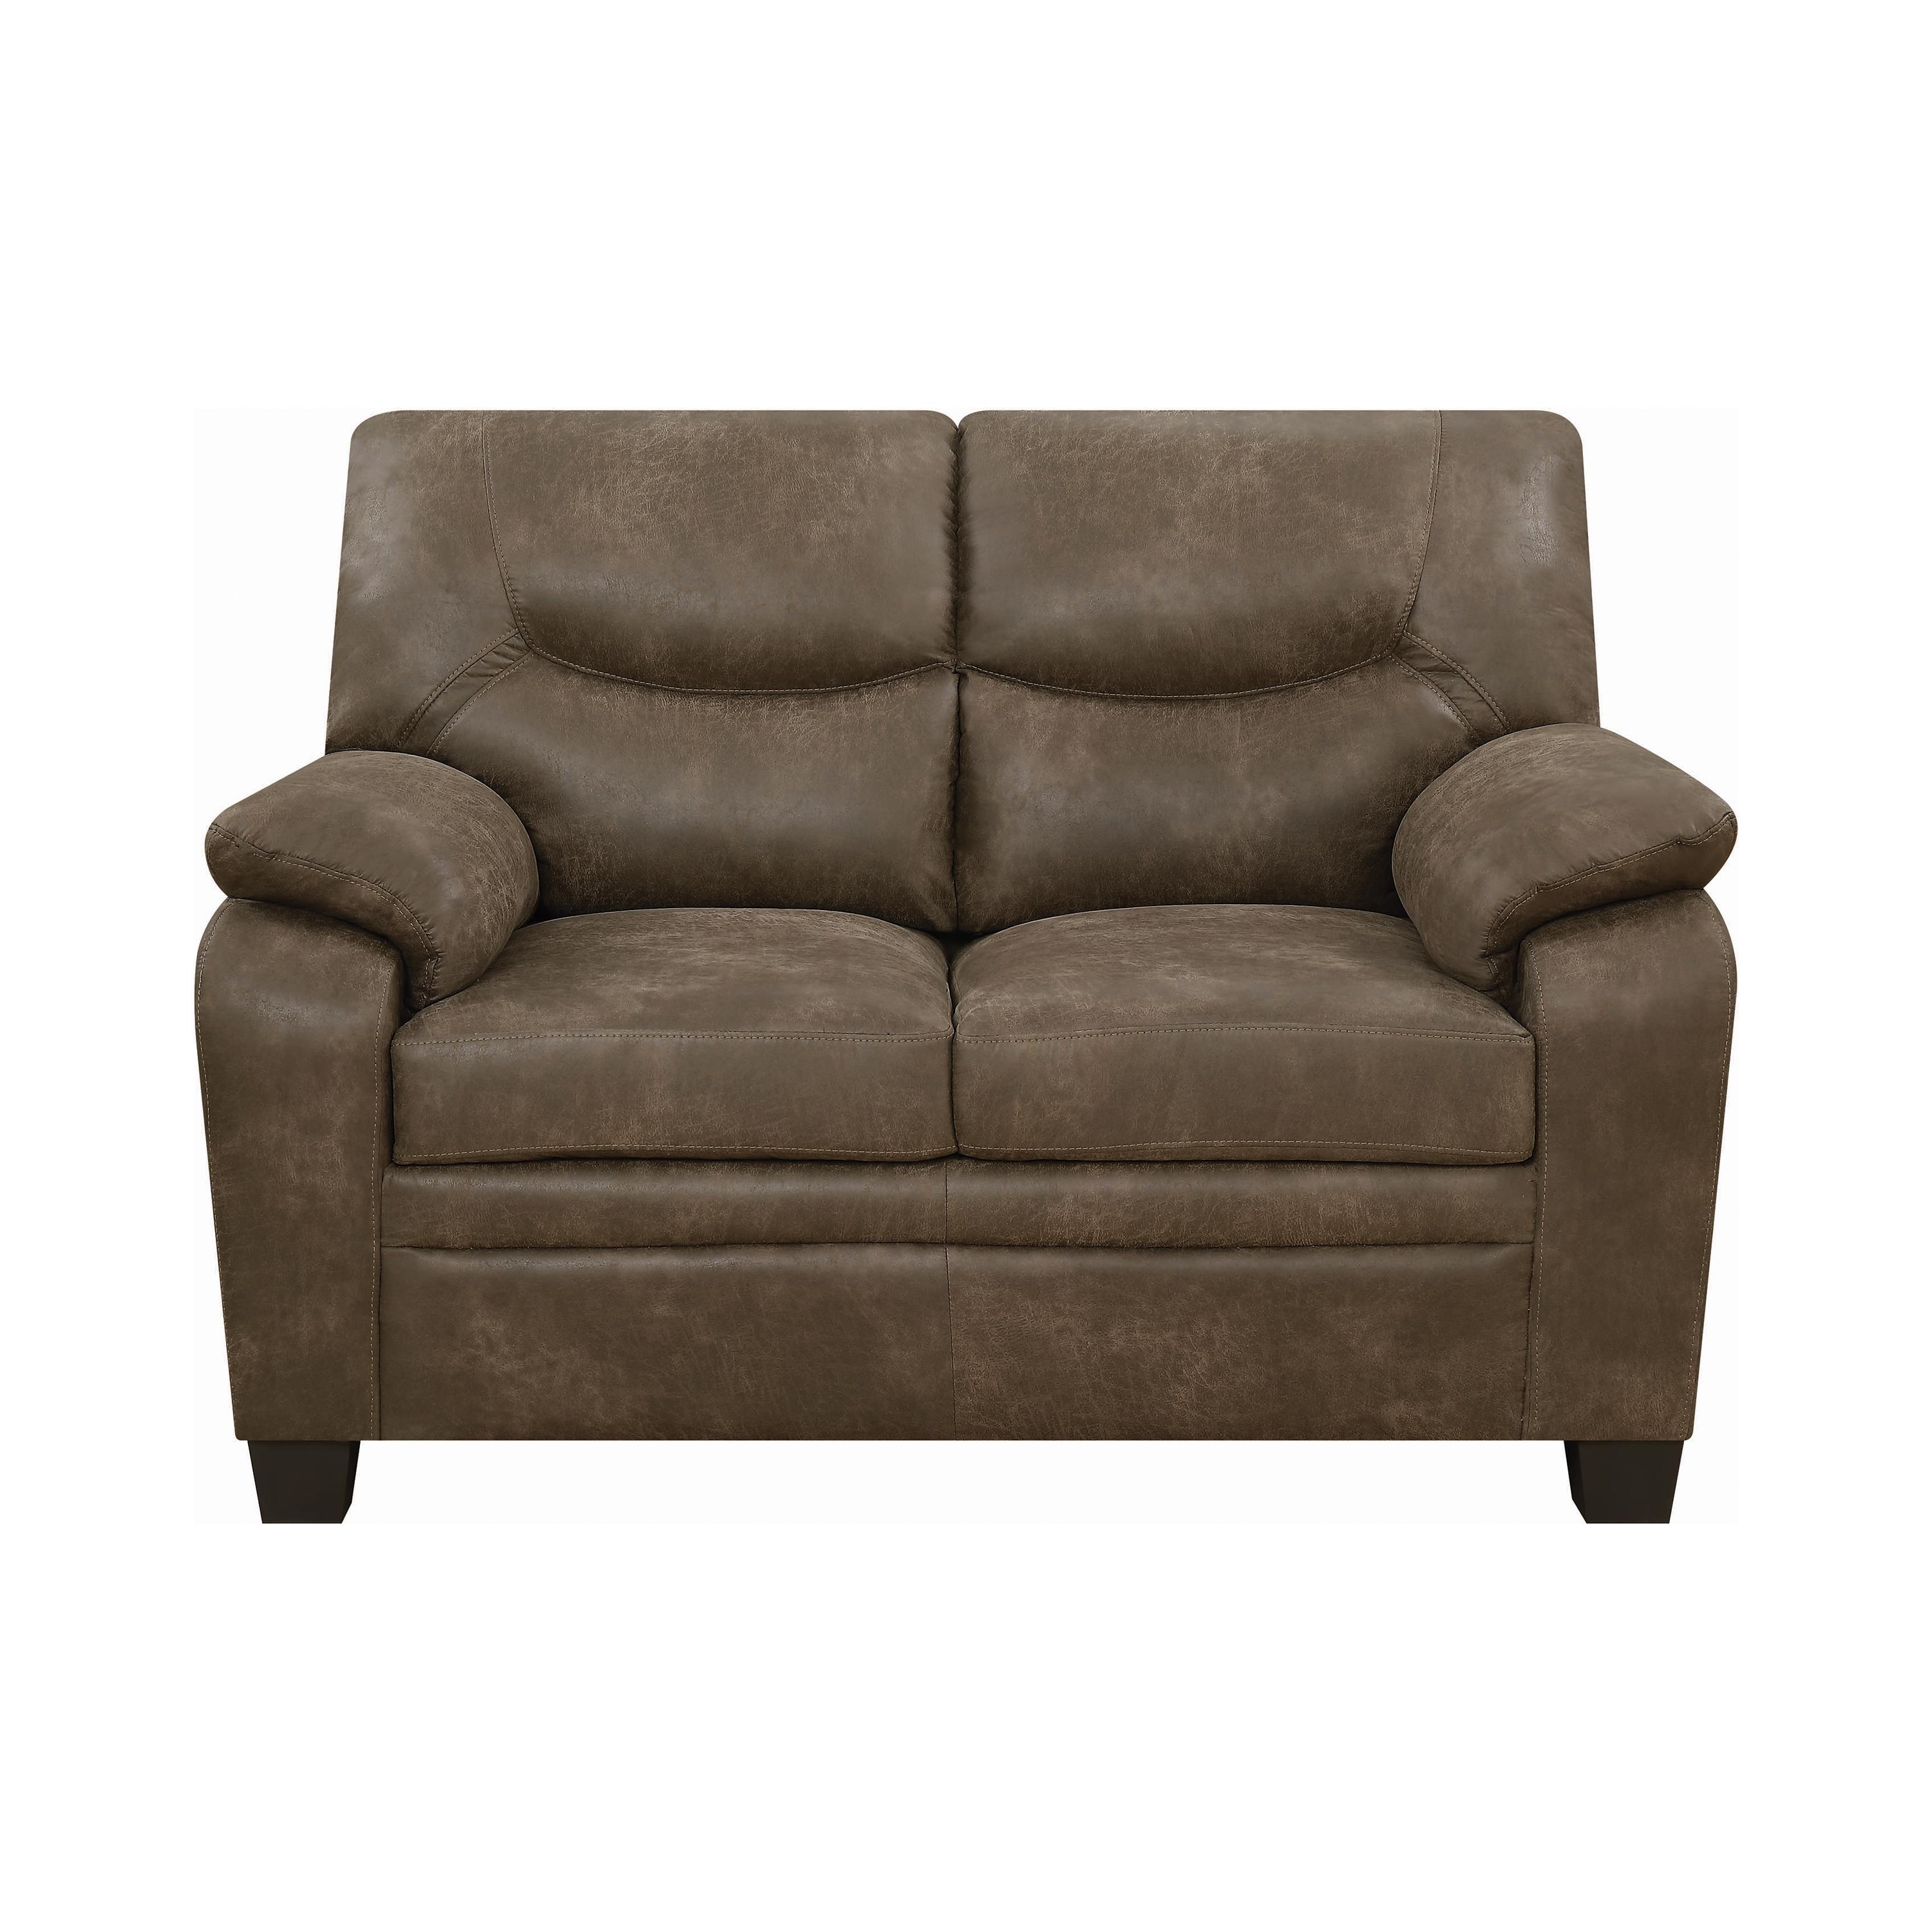 Classic Loveseat 506562 Meagan 506562 in Brown 